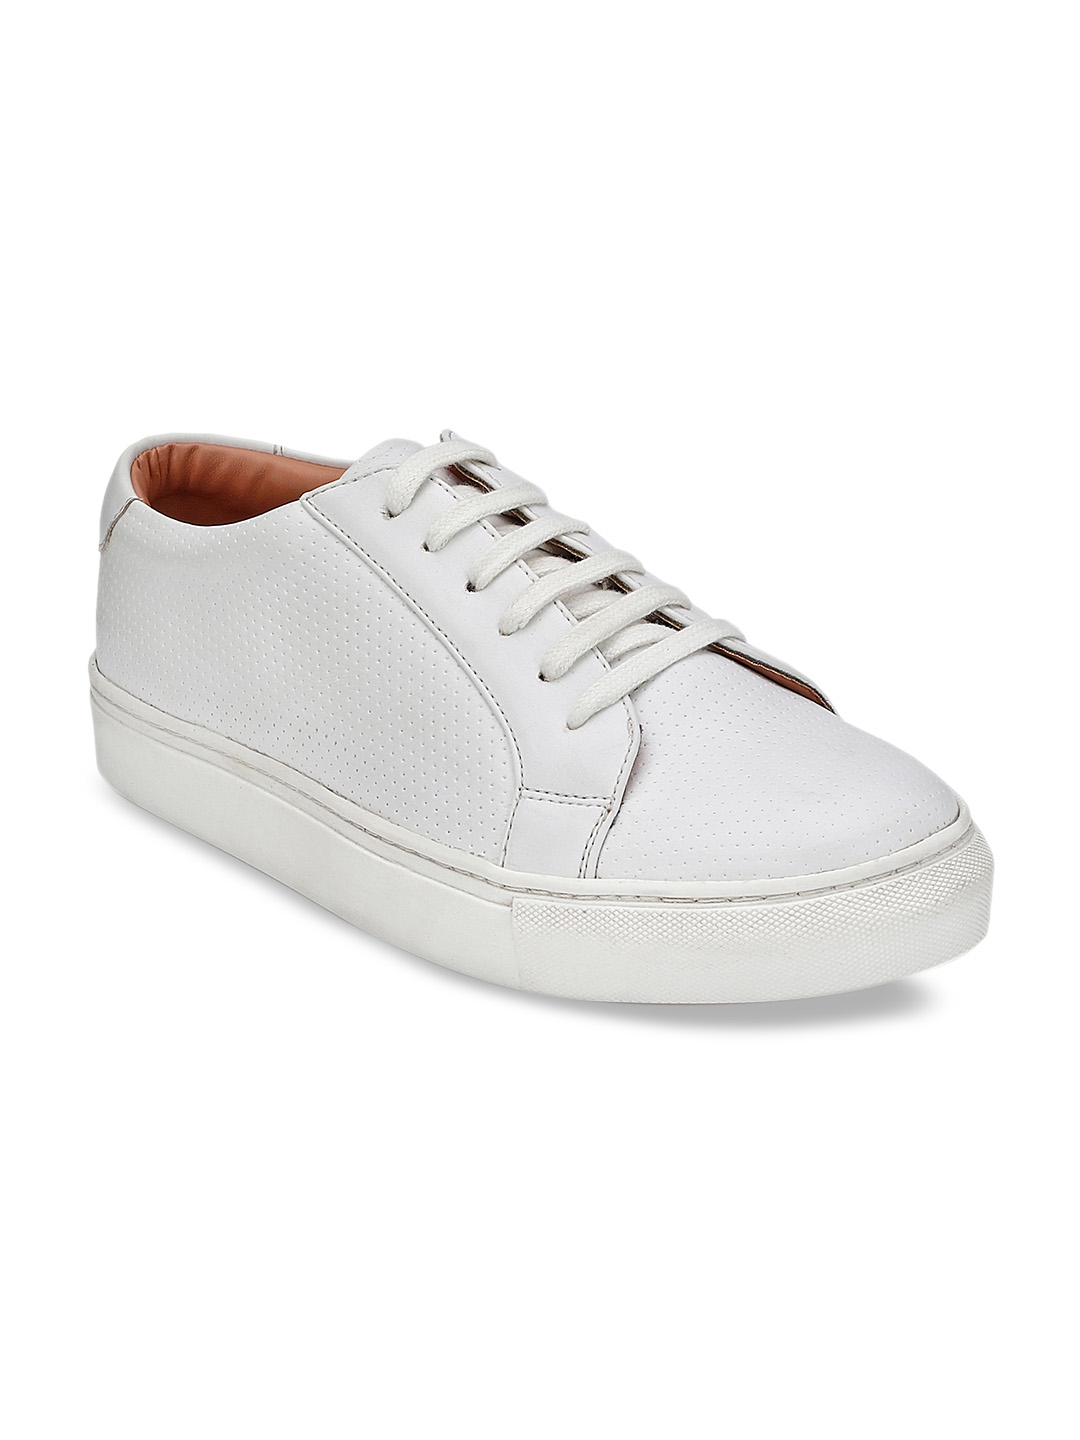 Buy Guava Men White Sneakers - Casual Shoes for Men 10869430 | Myntra